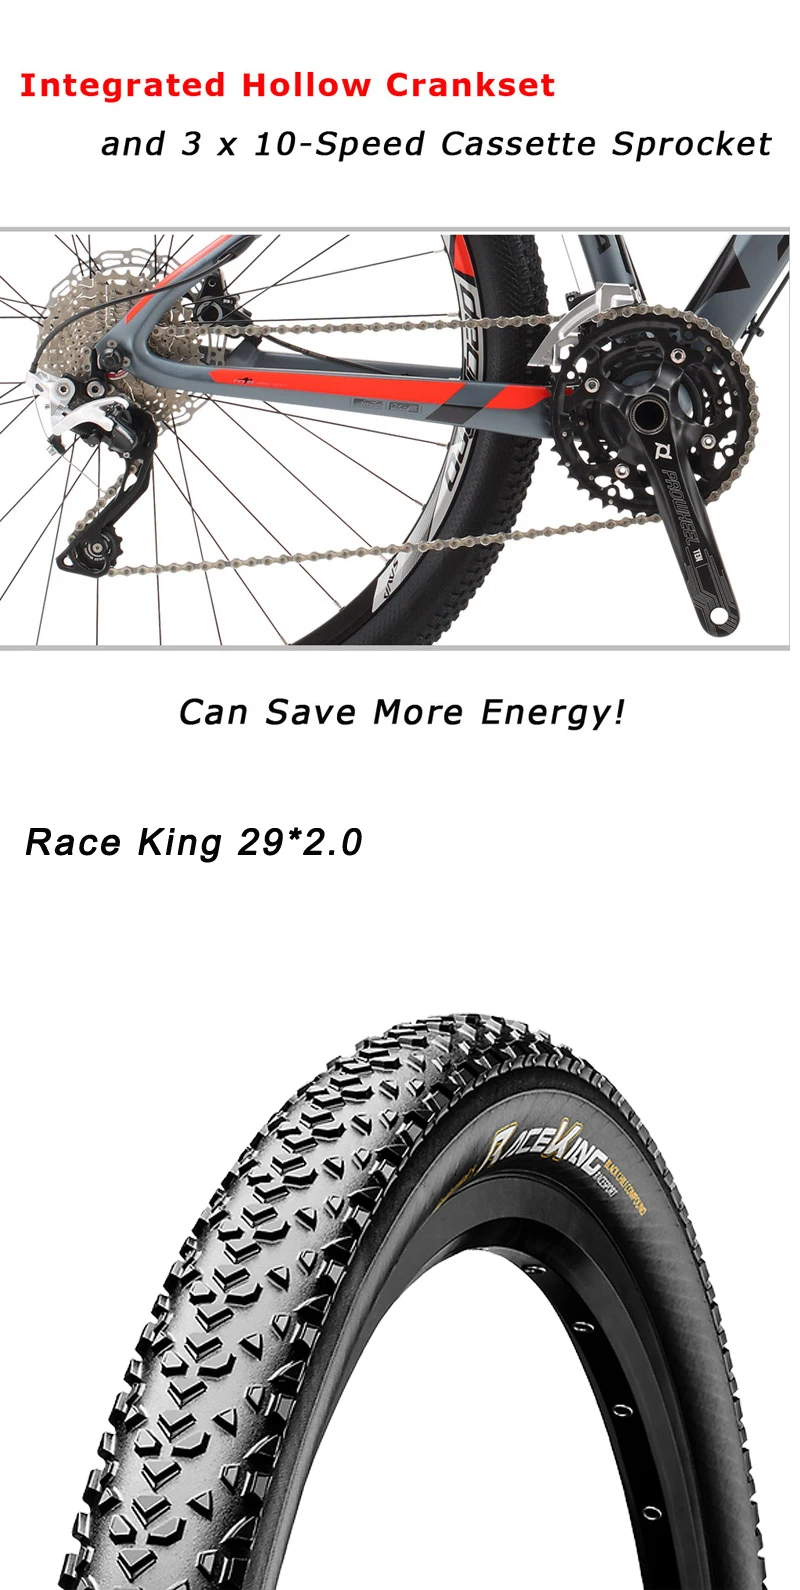 Hydraulic Disc Brake Carbon Mtb Bikes 12.5kg with Continental Race King tires